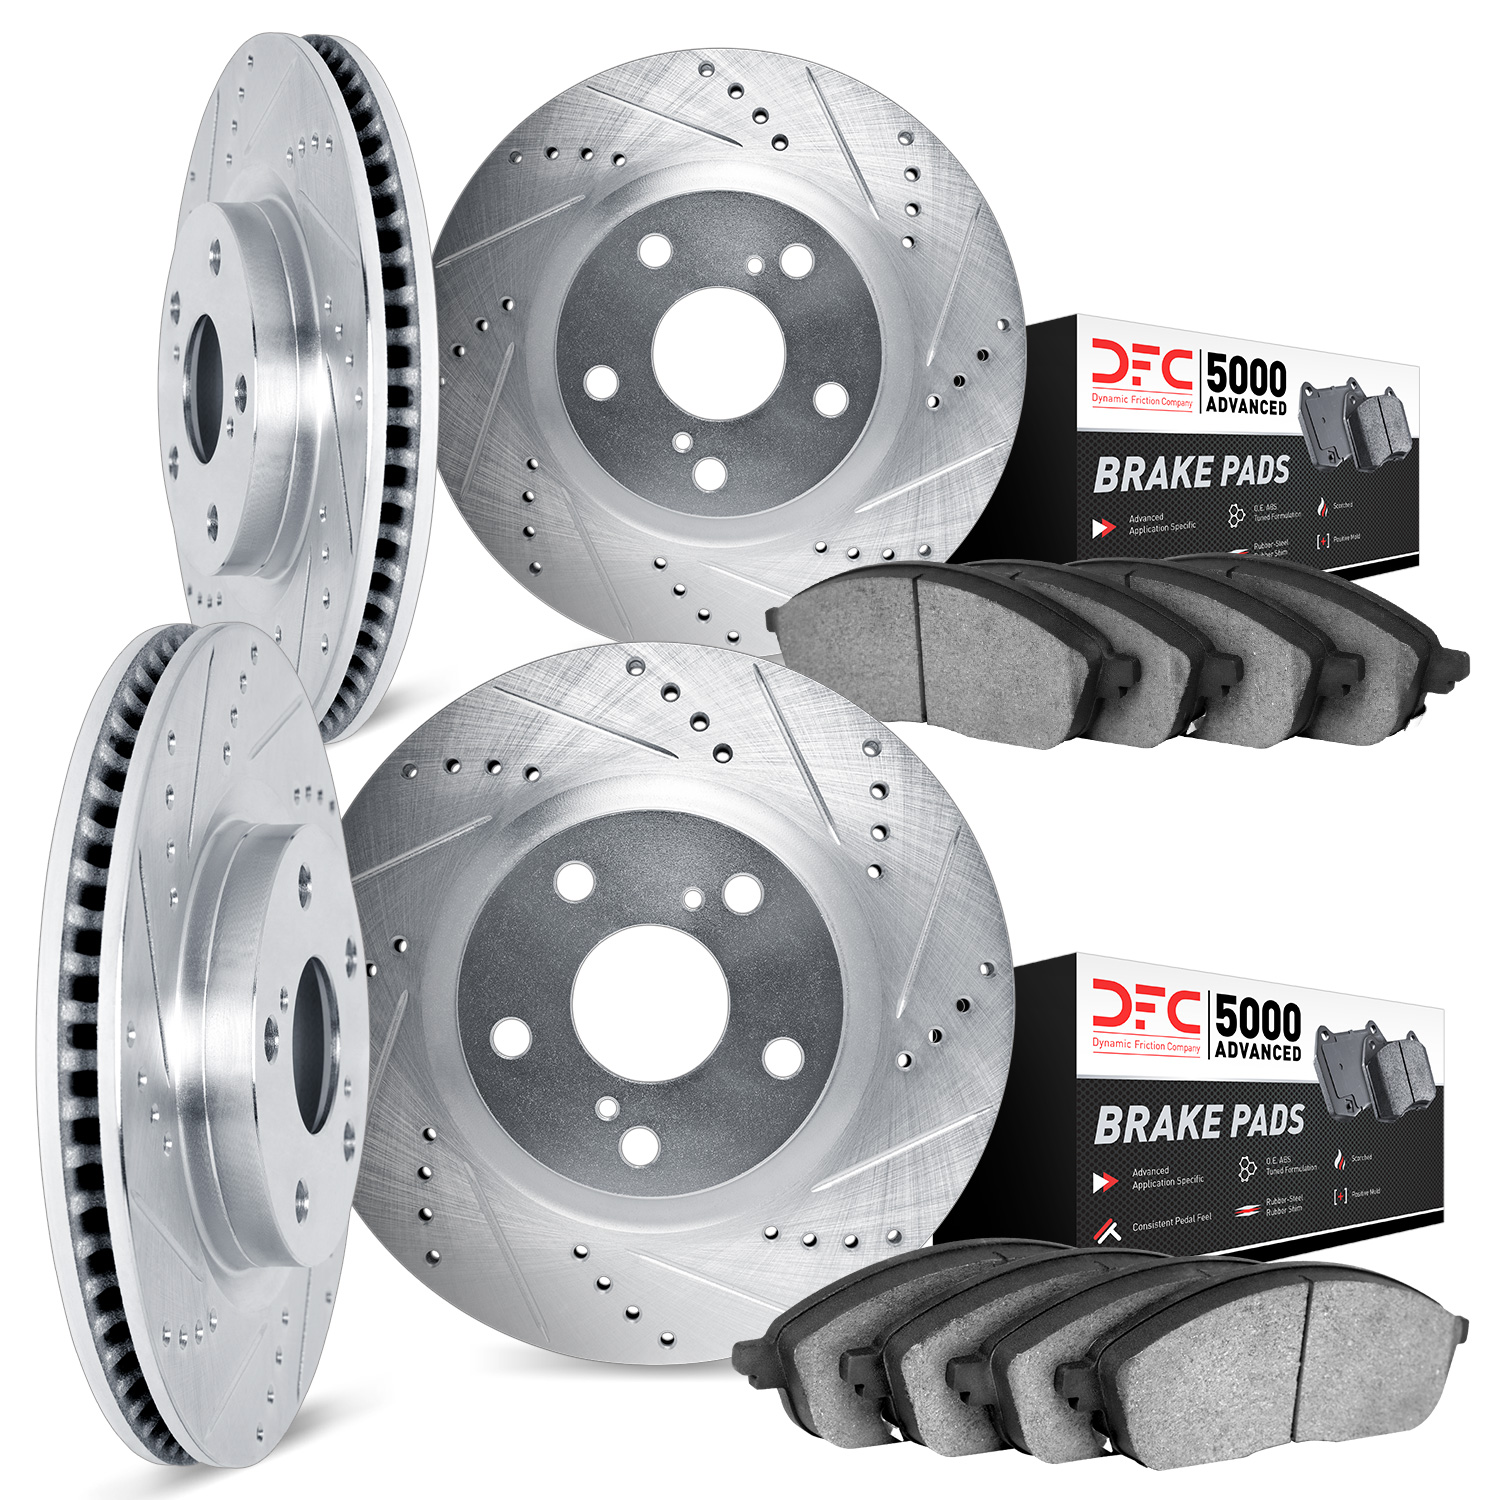 7504-13009 Drilled/Slotted Brake Rotors w/5000 Advanced Brake Pads Kit [Silver], 2008-2020 Subaru, Position: Front and Rear